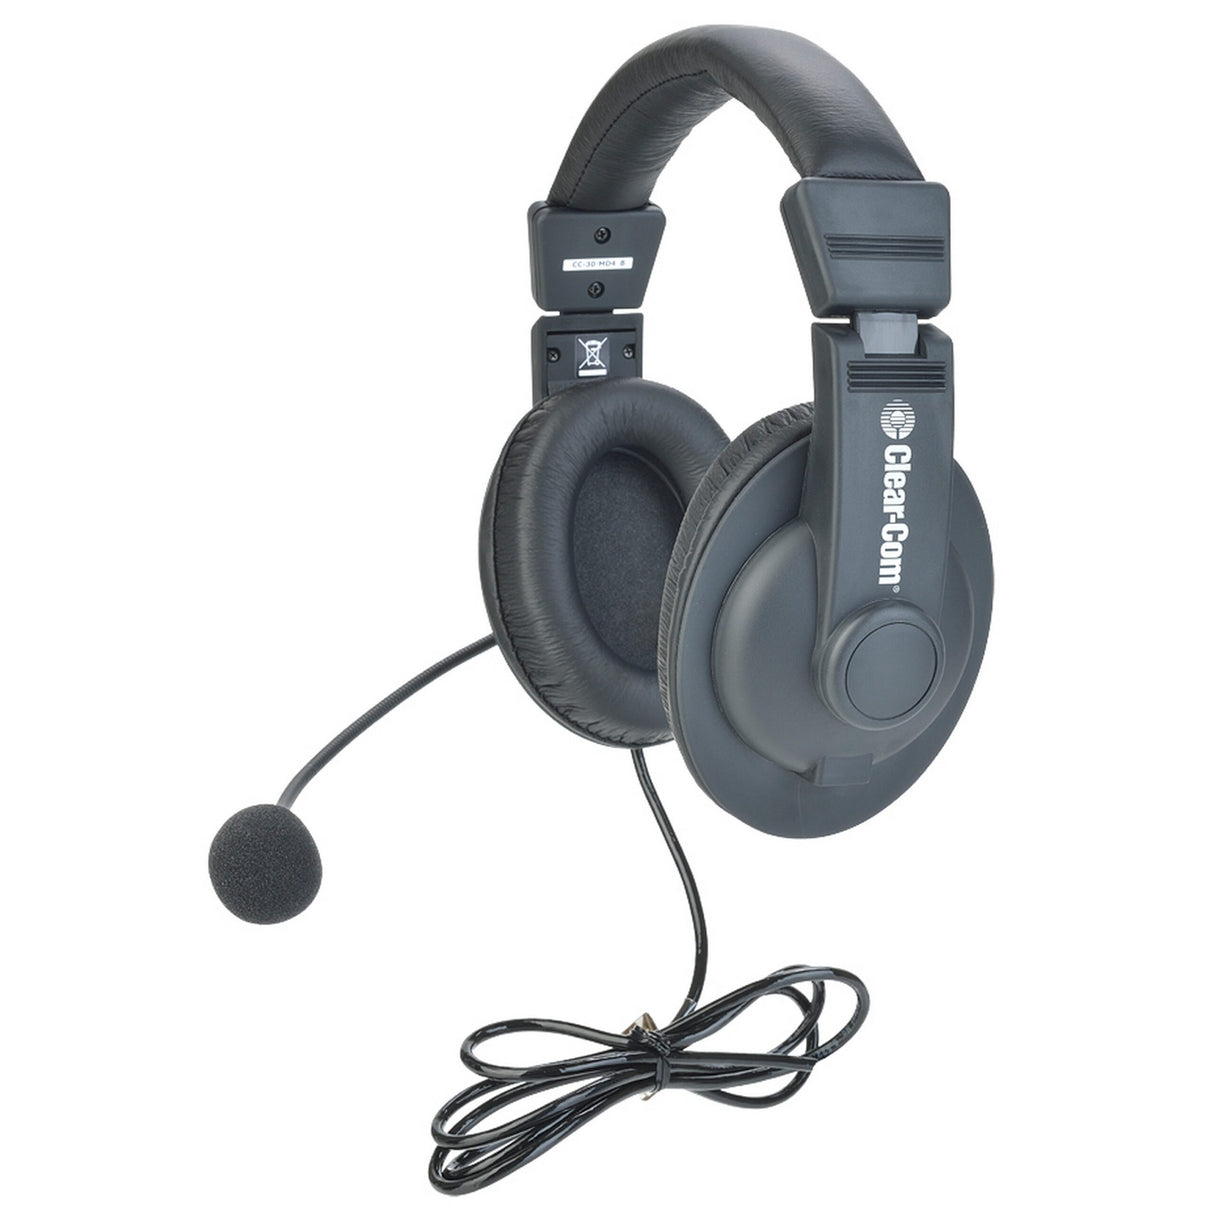 Clear-Com CC-30-X4 Dual-Ear Electret Microphone Headset with XLR Connector